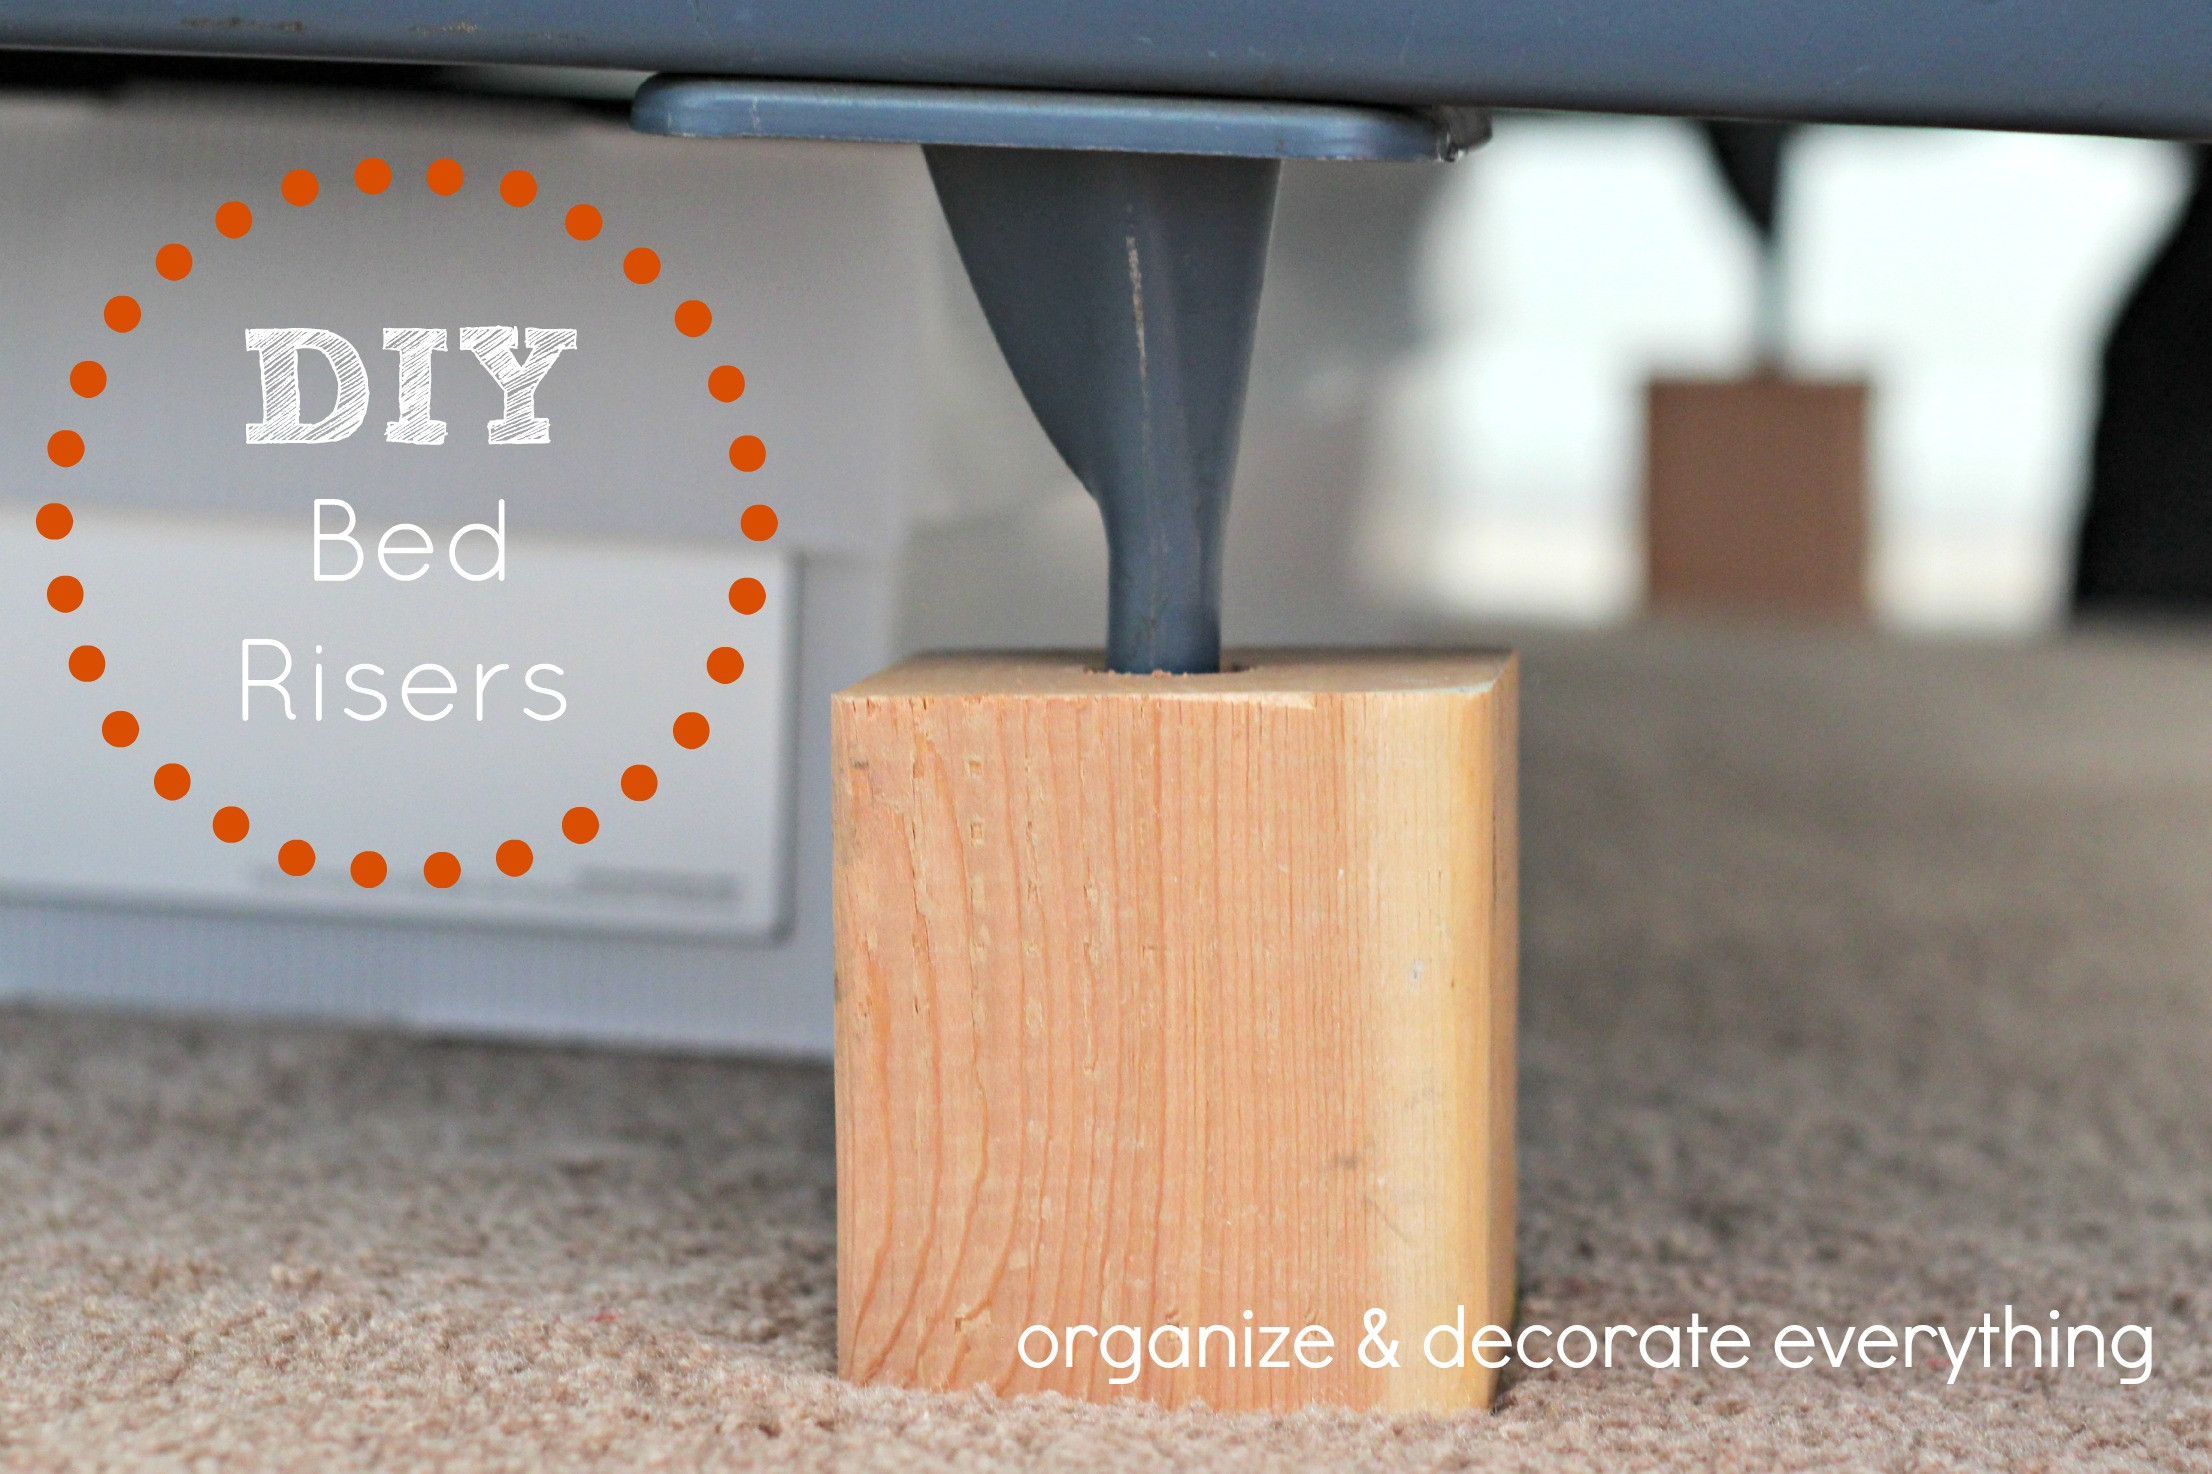 DIY Wooden Bed Risers
 DIY Bed Risers Organize and Decorate Everything